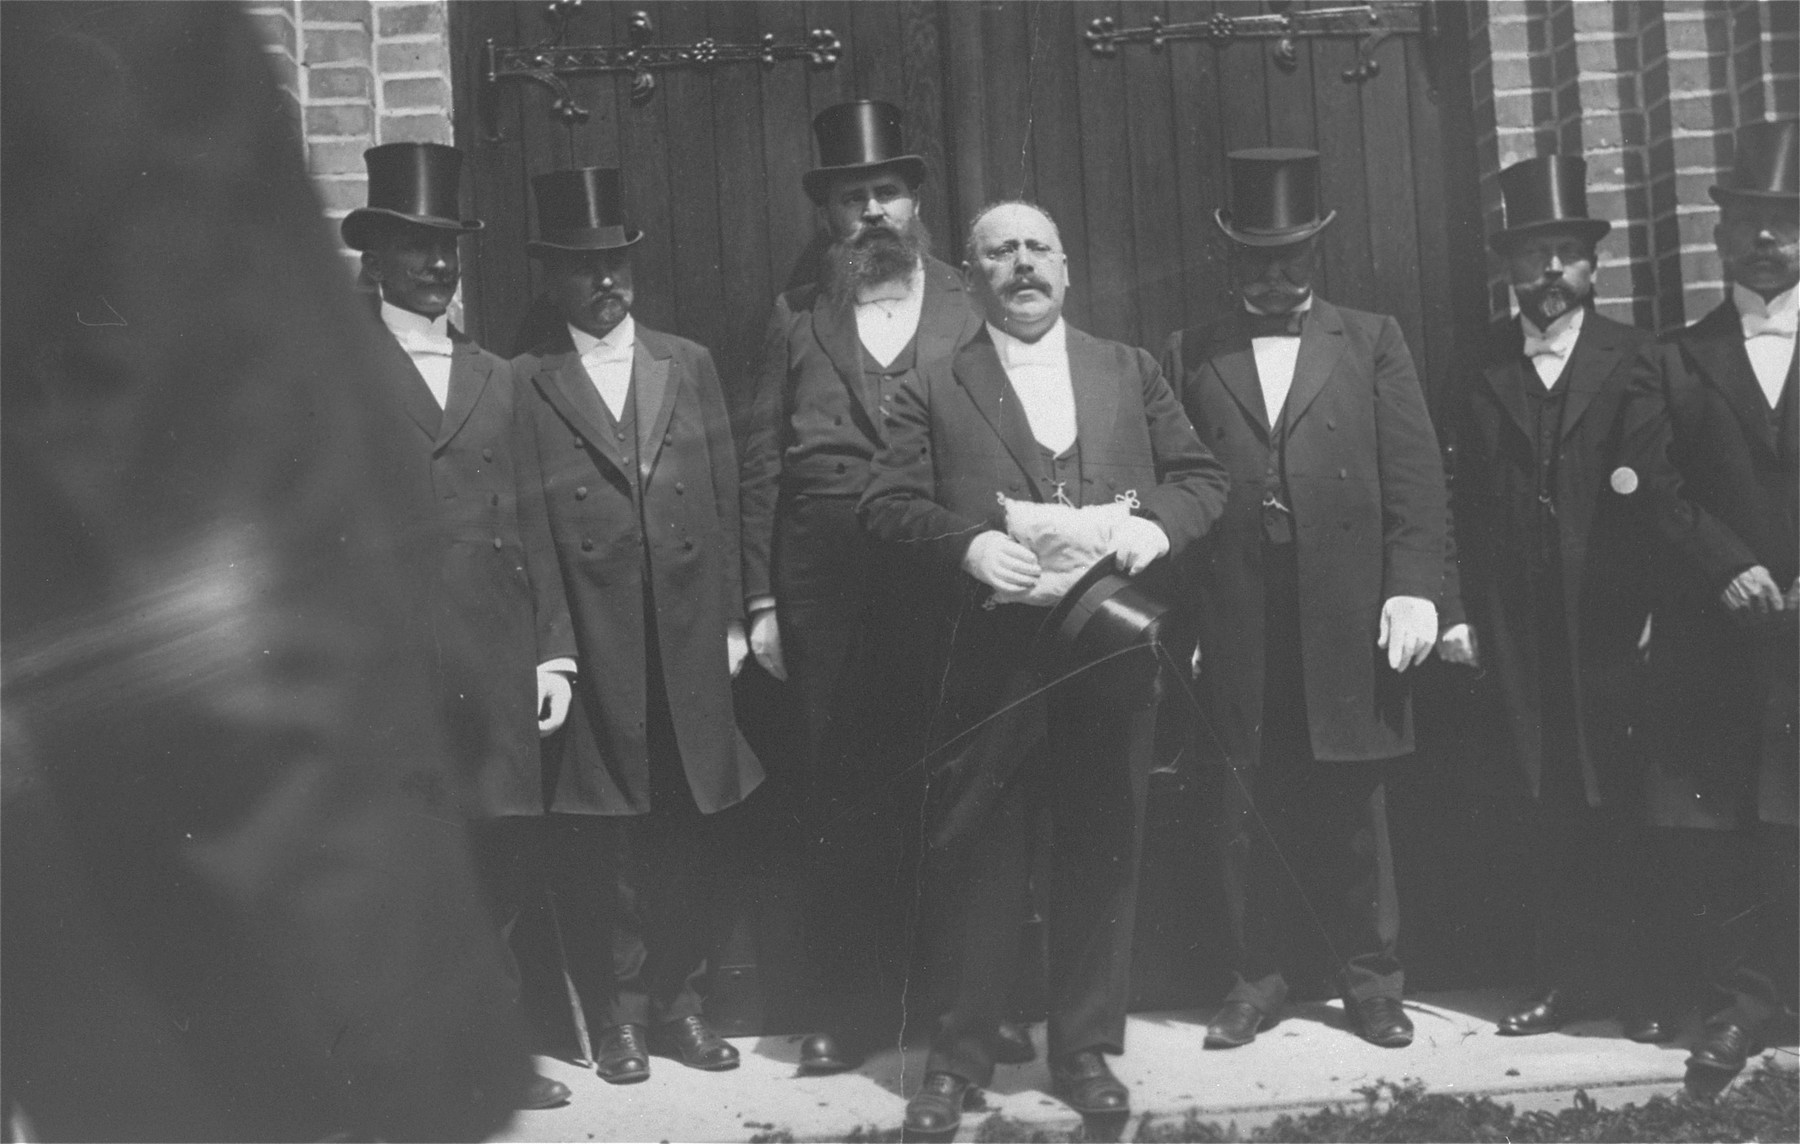 Prominent Jews dressed in top hats attend the dedication of the synagogue in Rastenburg, East Prussia.

Speaking is Max Jaruslawsky (the great-great uncle of the donor, George Fogelman).